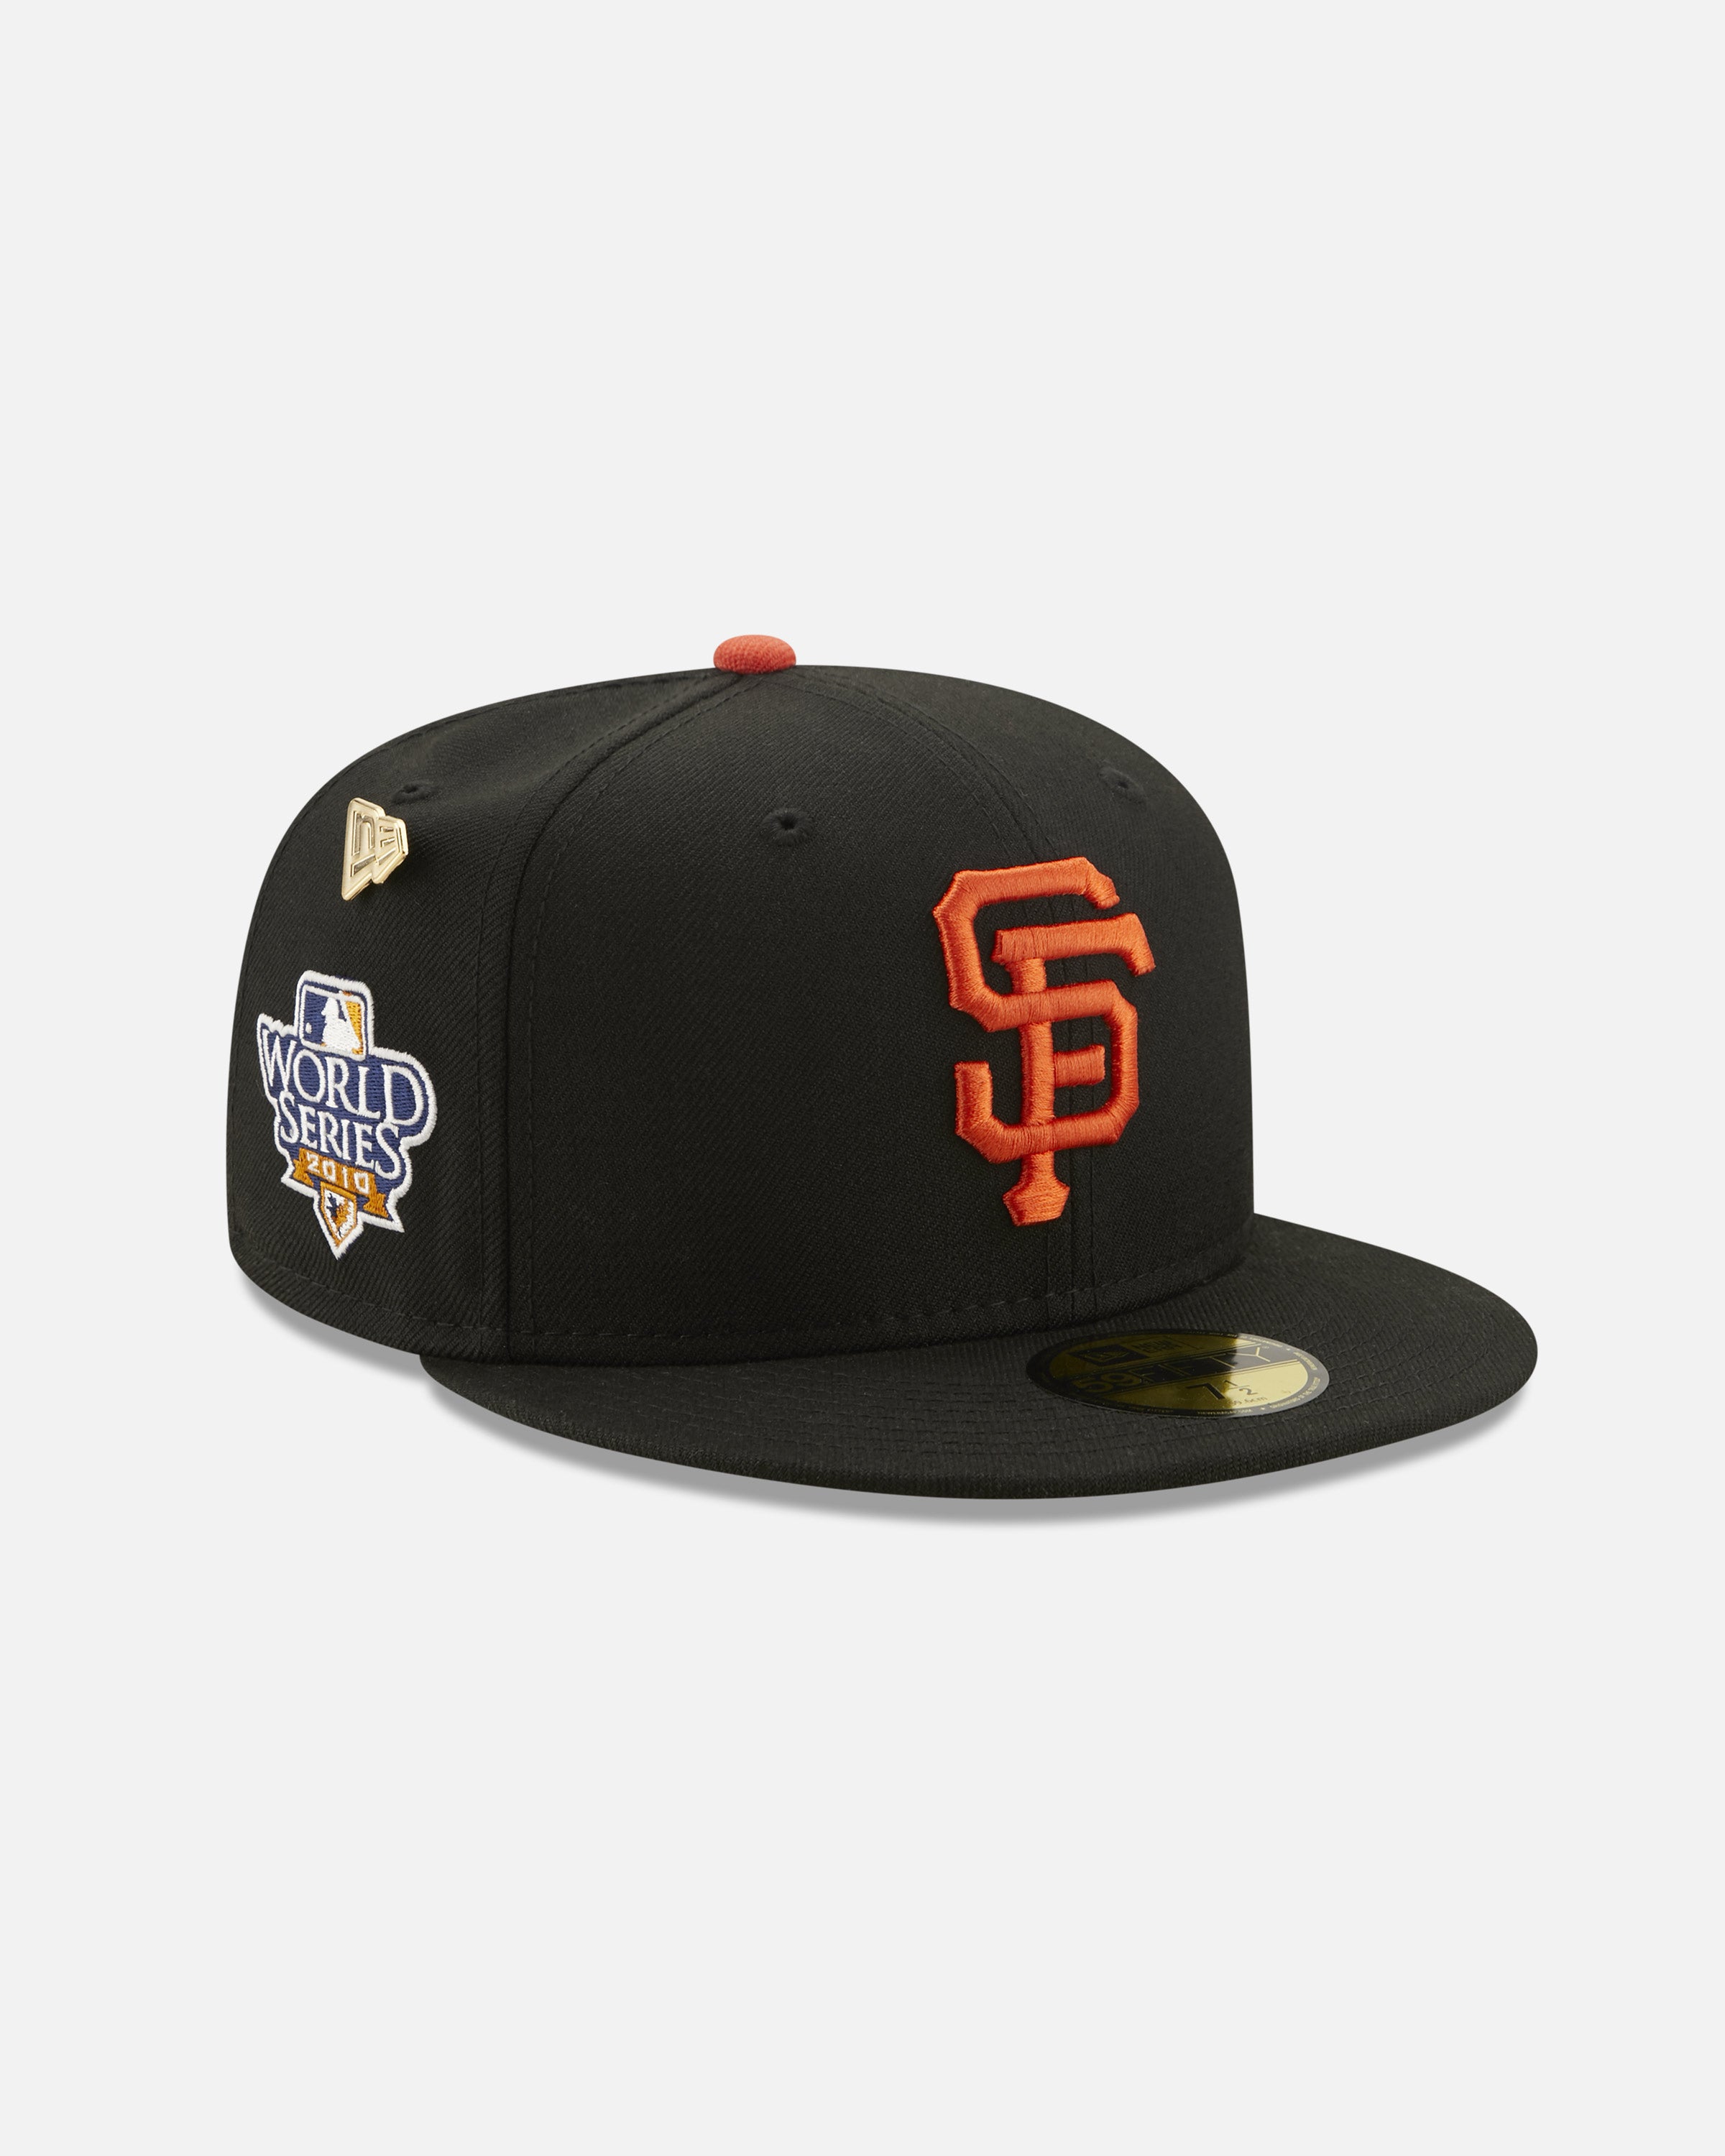 NEW ERA LOGO HISTORY 59FIFTY FITTED - SAN FRANCISCO GIANTS 2010